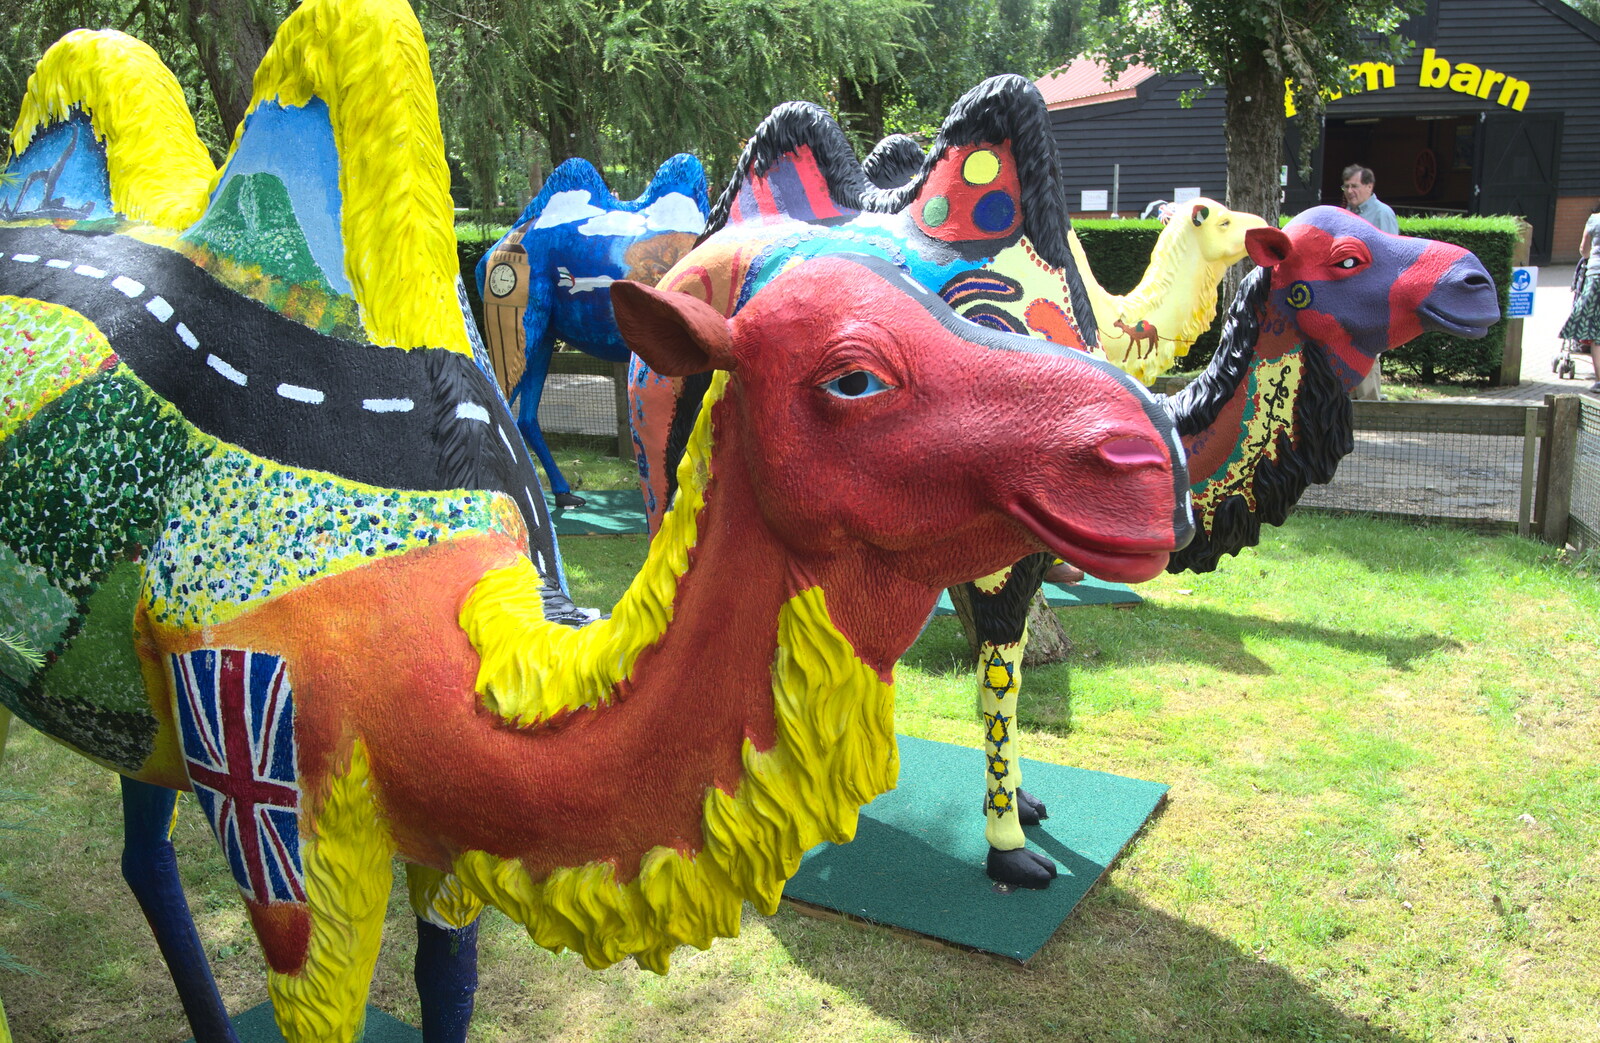 Some brightly-painted model camels have appeared from Tiger Cubs at Banham Zoo, Banham, Norfolk - 6th August 2013